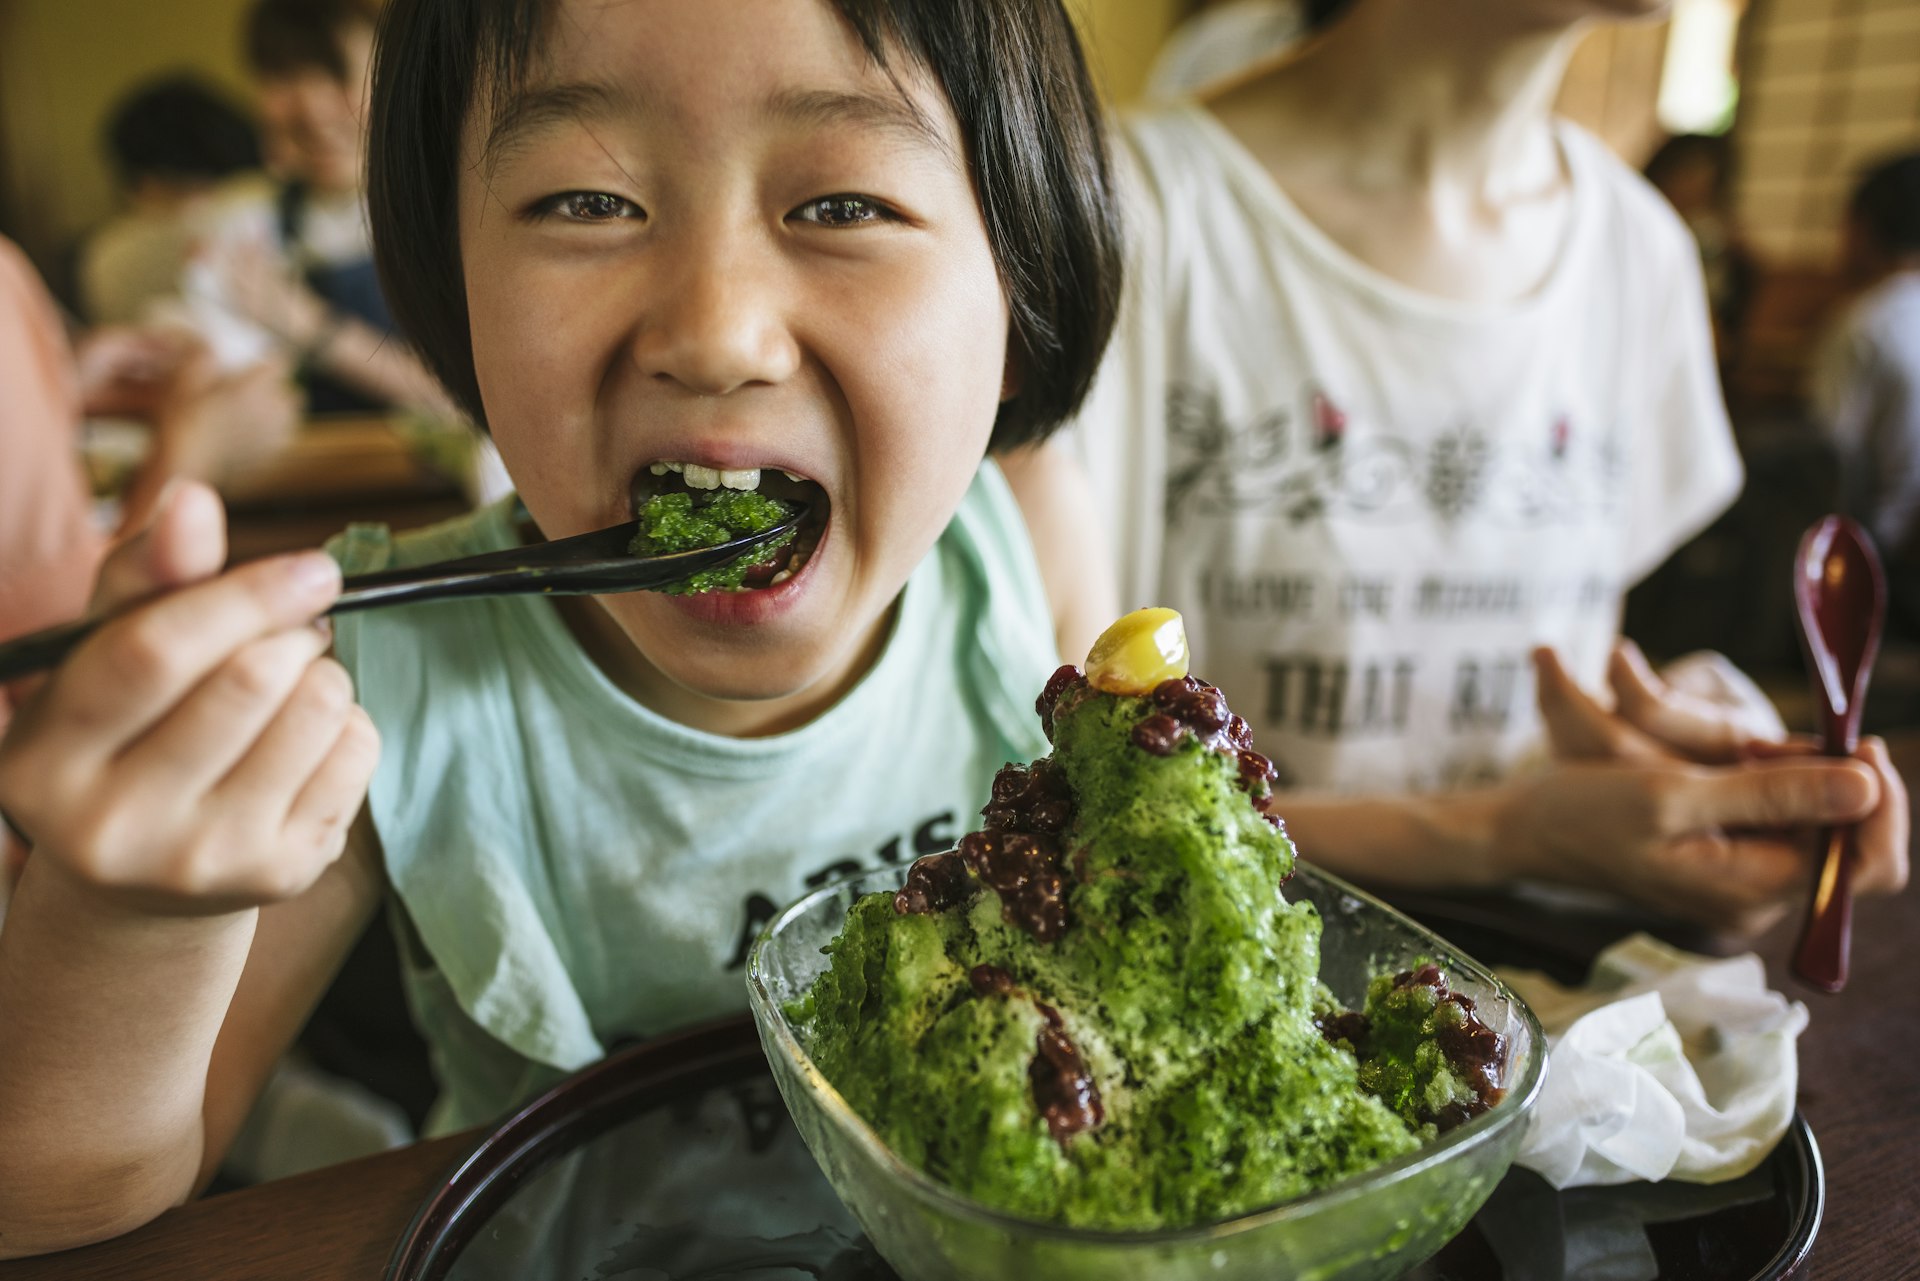 A smiling child takes a bite of green shaved ice in Kyoto